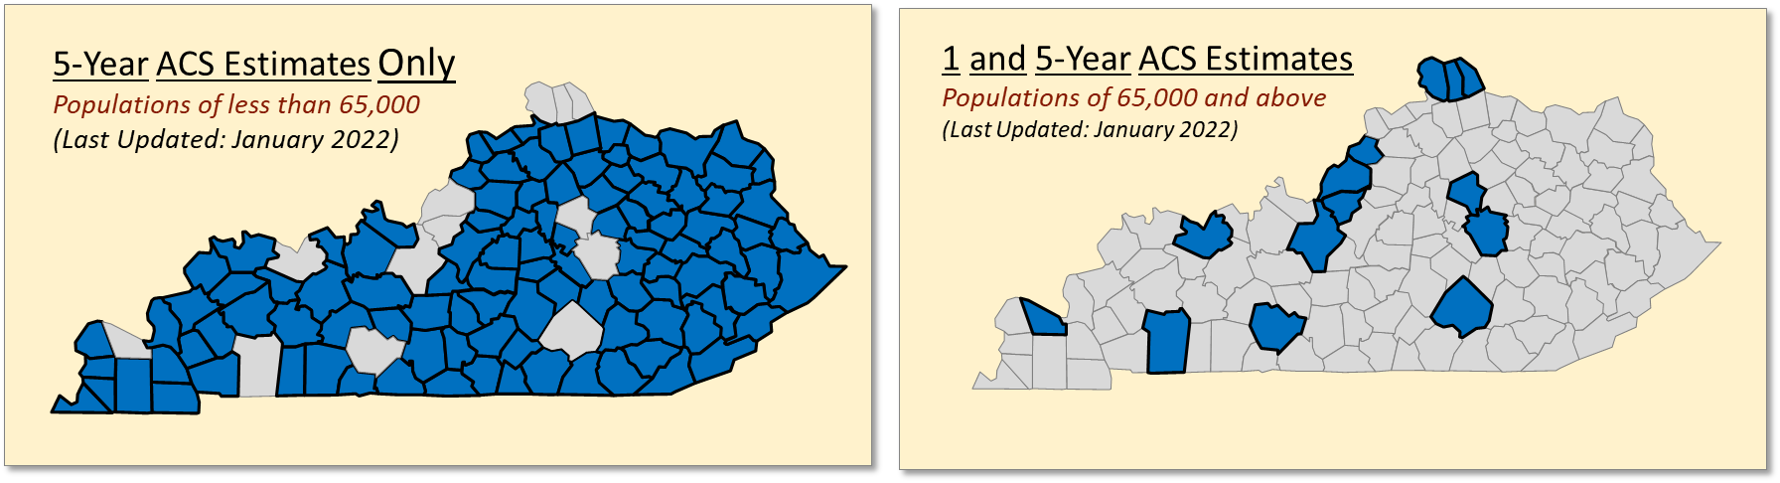 Maps of Kentucky Counties with 1 and 5 year ACS estimates